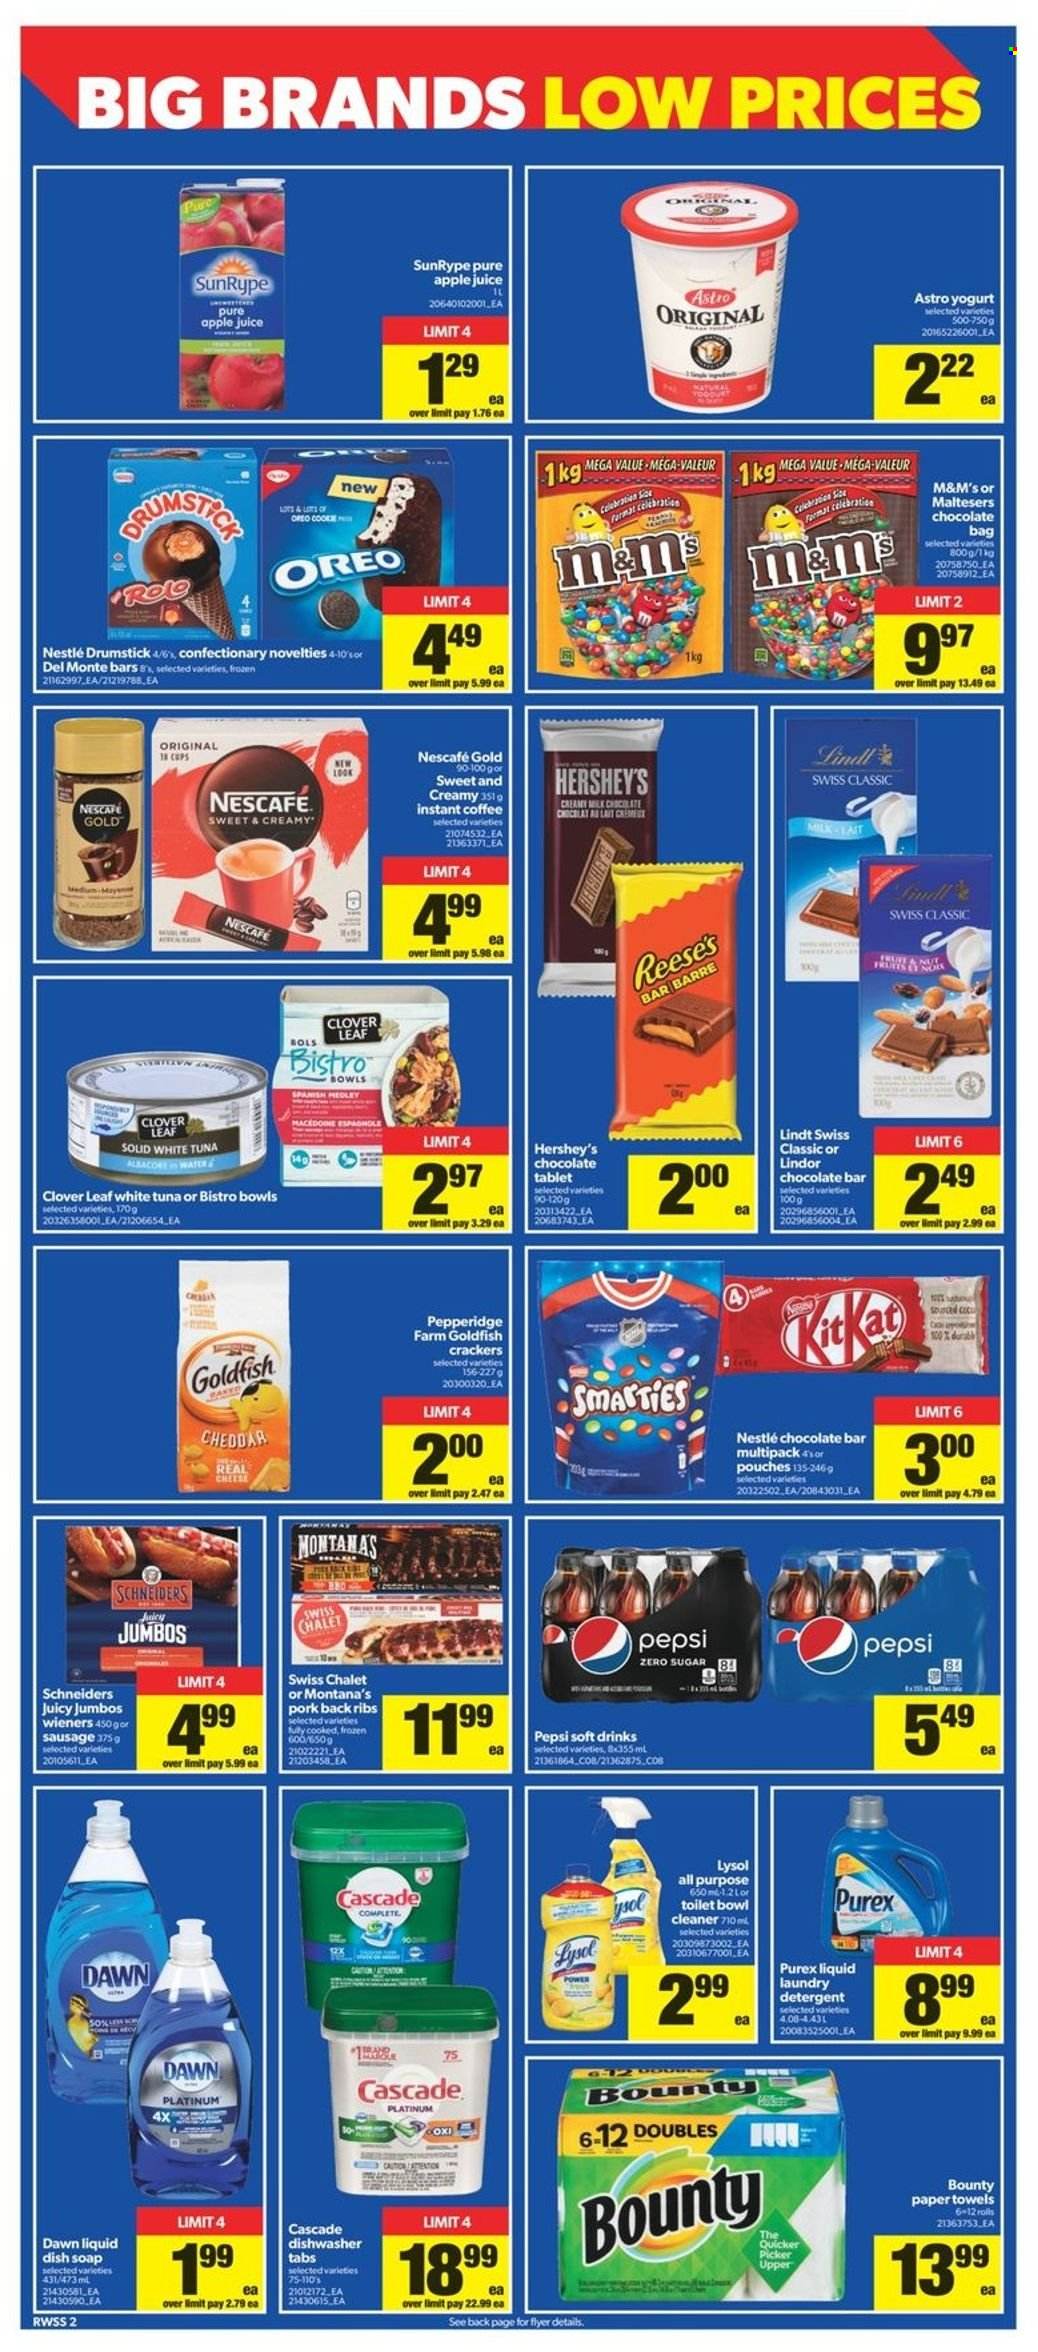 thumbnail - Real Canadian Superstore Flyer - May 12, 2022 - May 18, 2022 - Sales products - tablet, tuna, sausage, cheese, yoghurt, Clover, milk, Reese's, Hershey's, Bounty, crackers, Maltesers, chocolate bar, Goldfish, apple juice, Pepsi, juice, soft drink, instant coffee, pork meat, pork ribs, pork back ribs, kitchen towels, paper towels, cleaner, Lysol, laundry detergent, Cascade, Purex, soap, detergent, Nestlé, Oreo, Lindt, Lindor, Smarties, Nescafé, M&M's. Page 3.